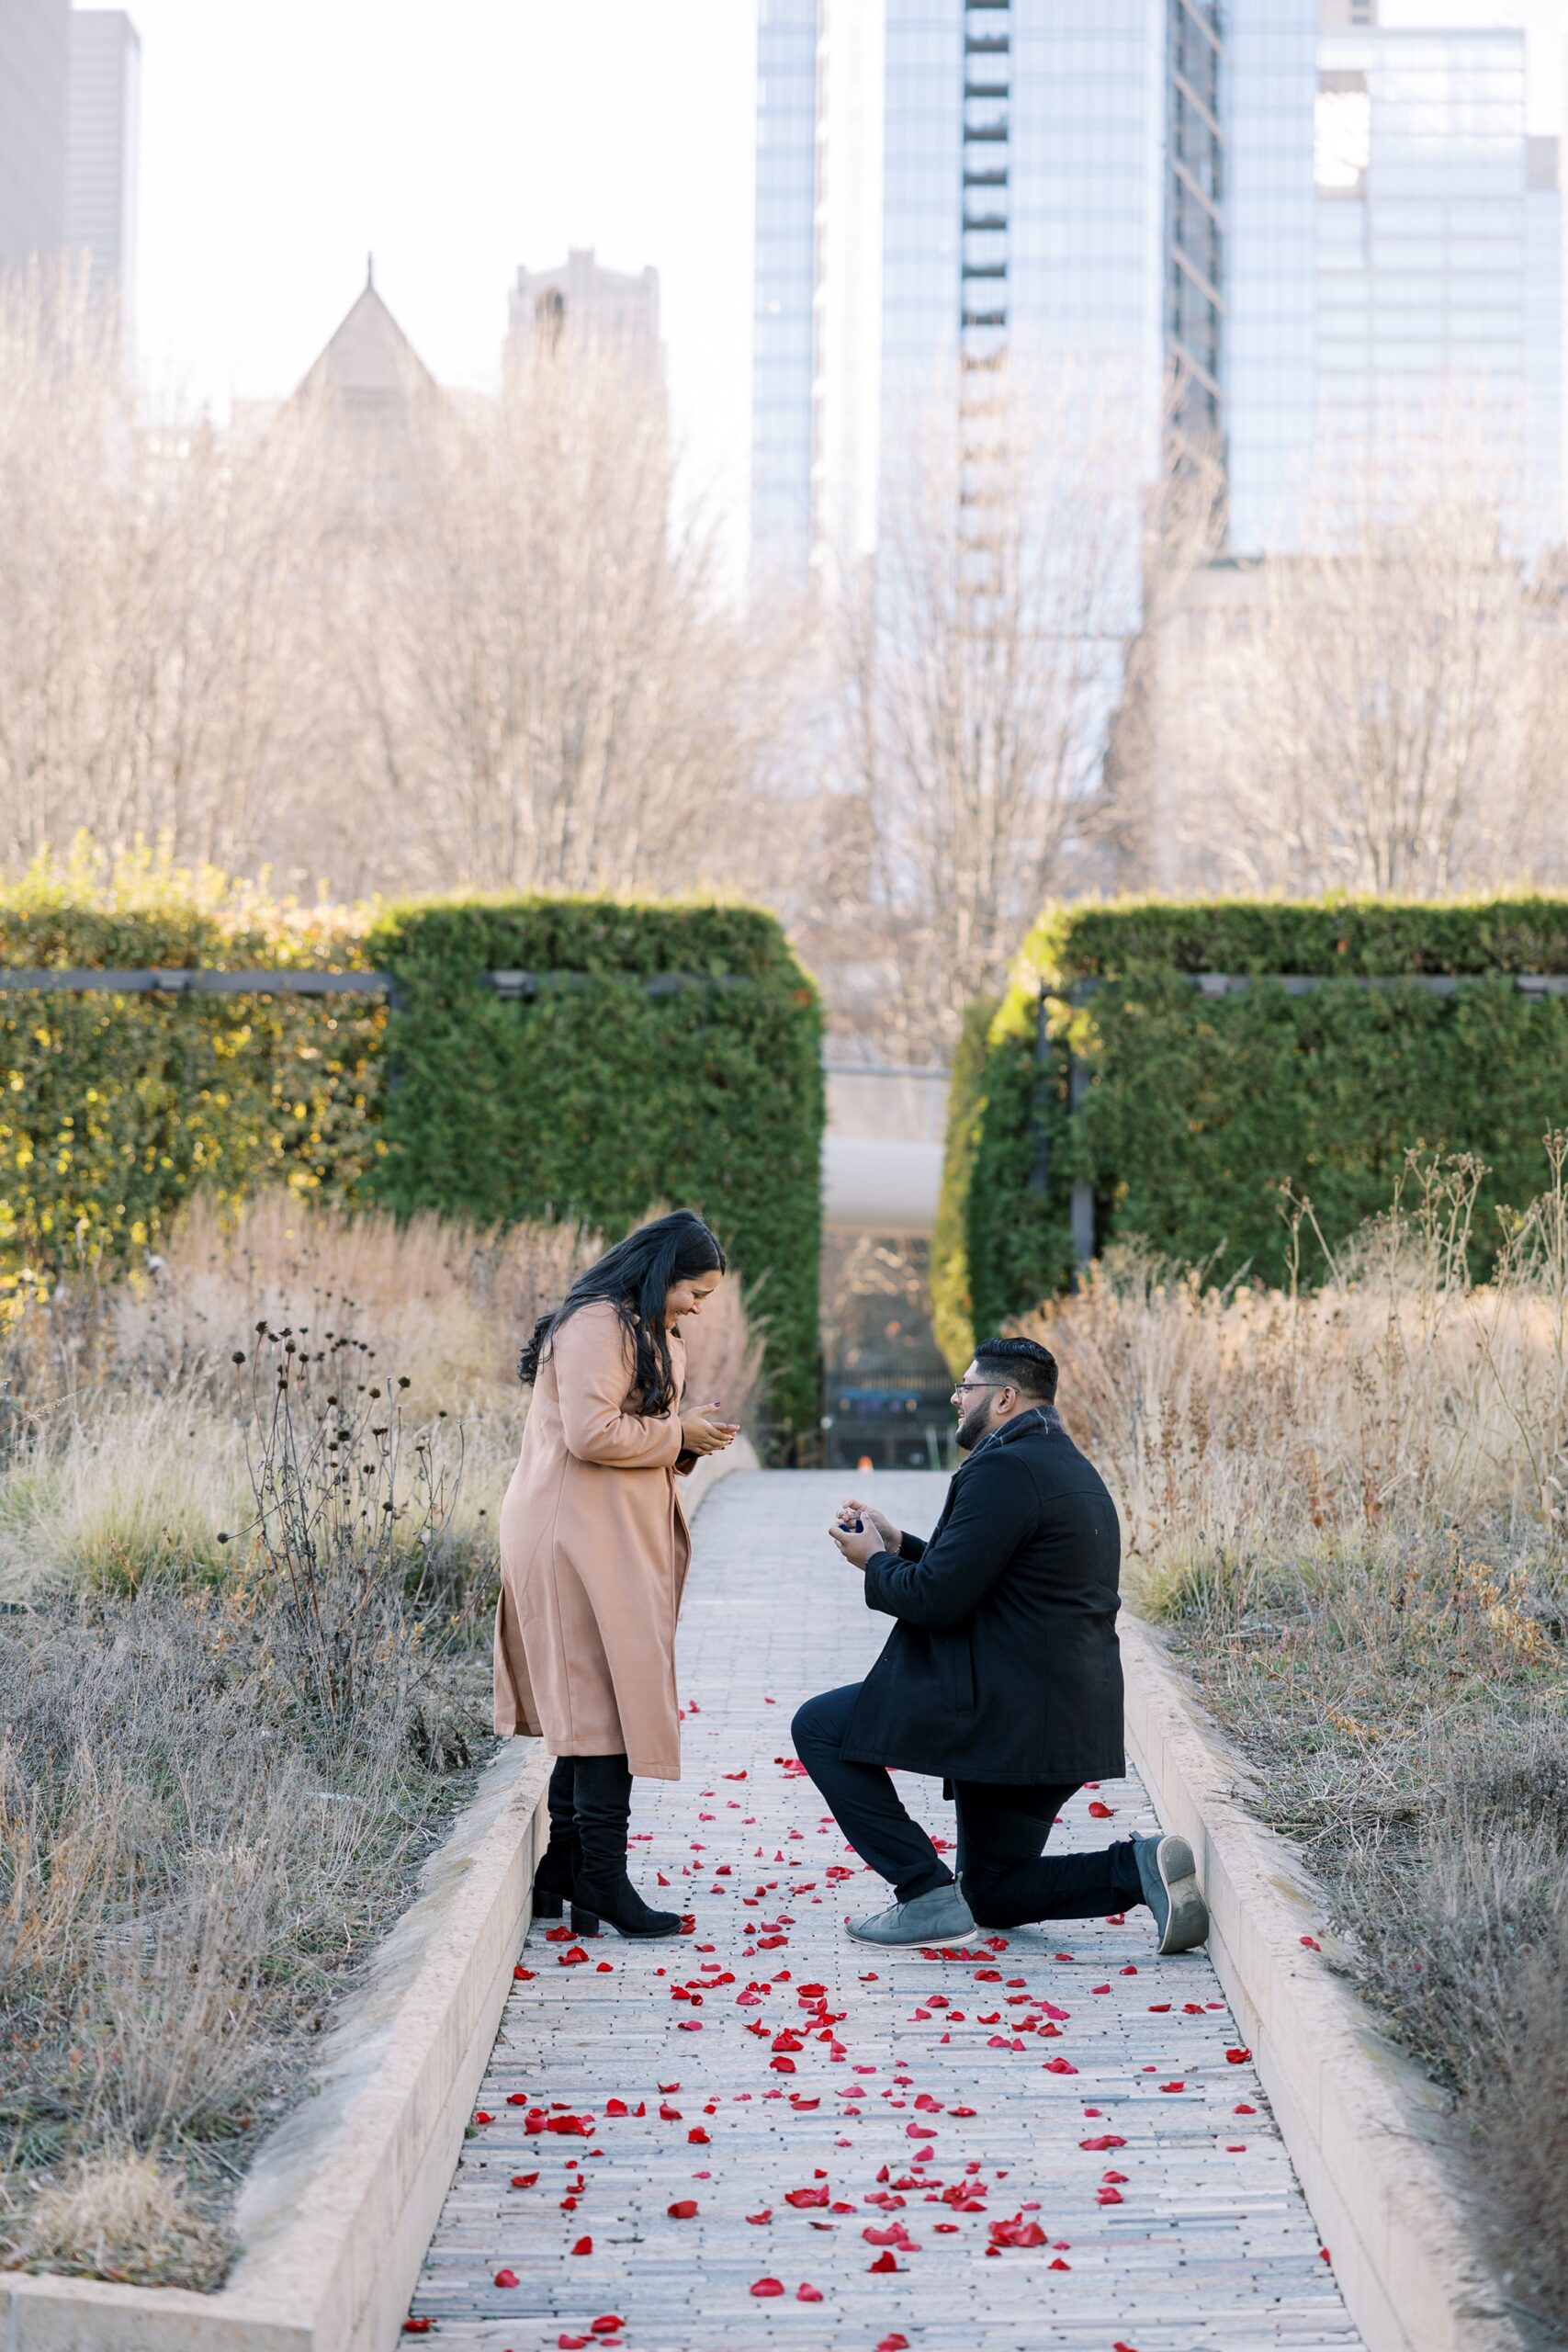 Excited woman being proposed to in a garden